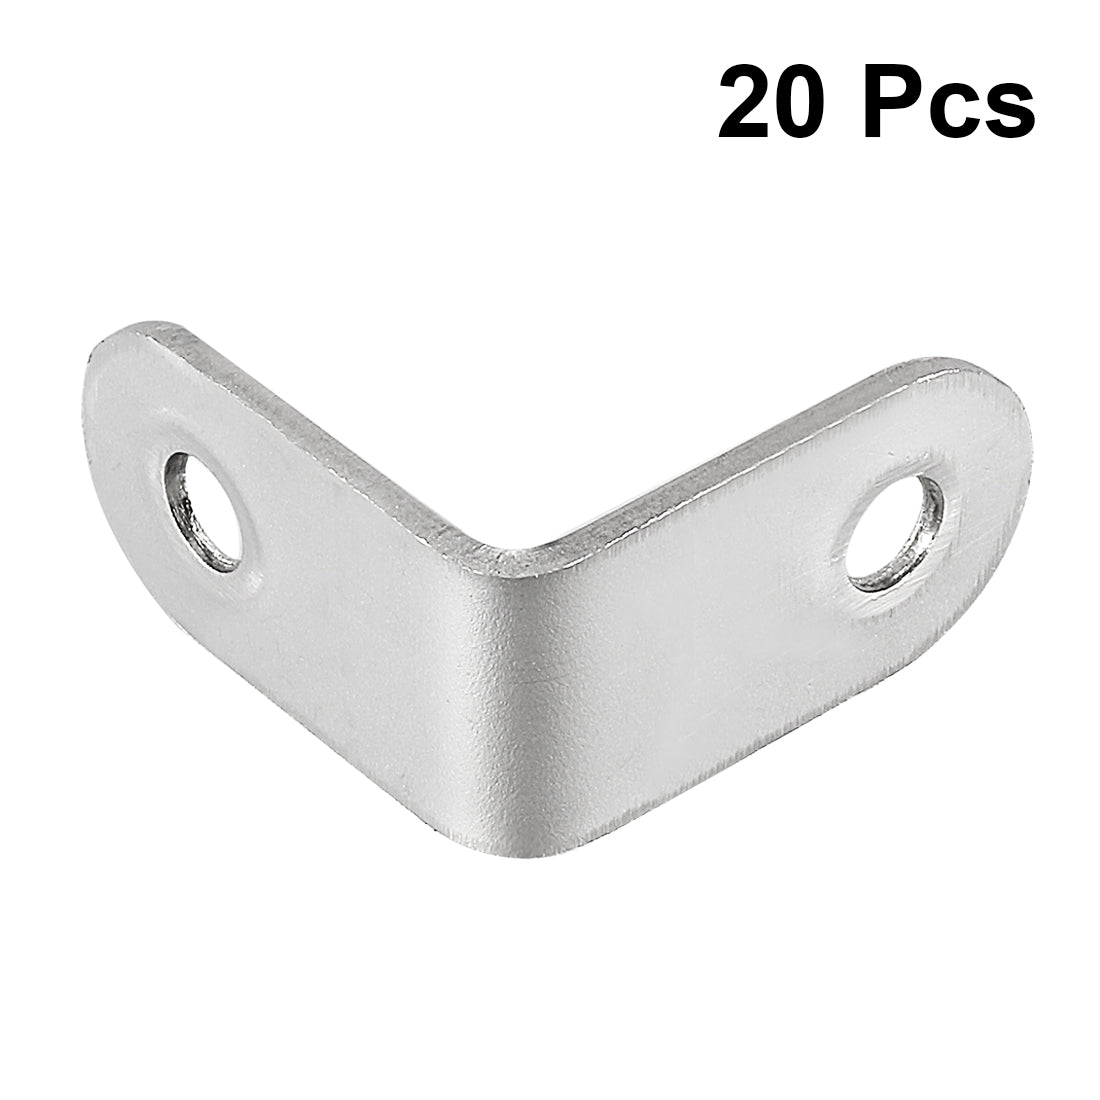 uxcell Uxcell 20pcs 30mmx30mmx16mm Stainless Steel Corner Brace Joint L Shape Right Angle Bracket Fastener